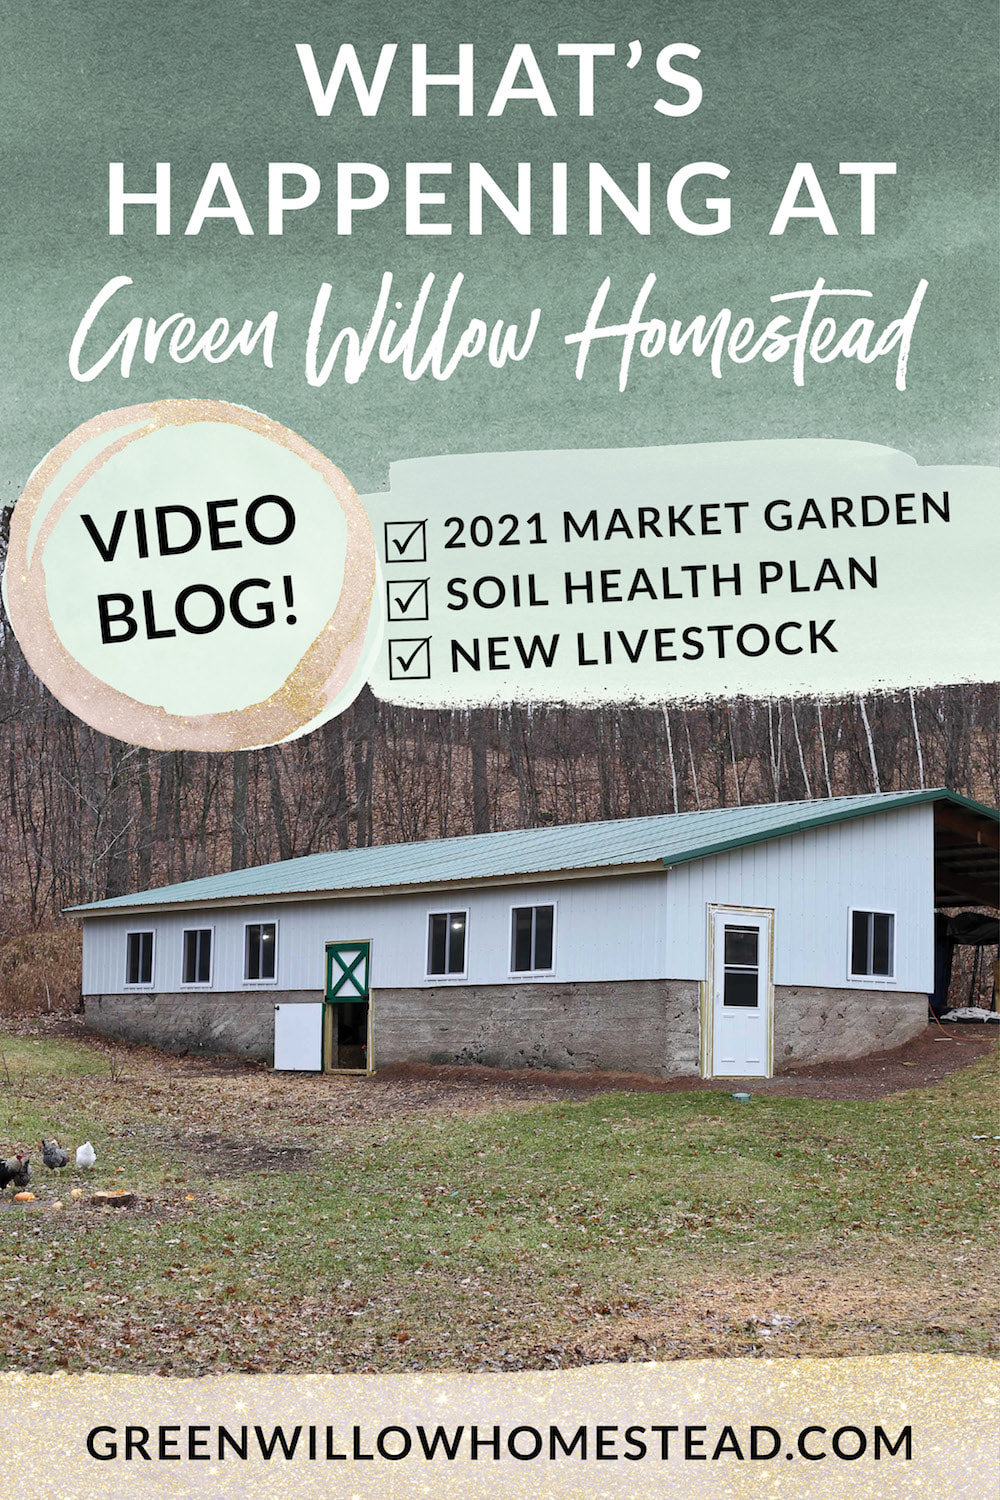 What's happening at Green Willow Homestead Video Blog